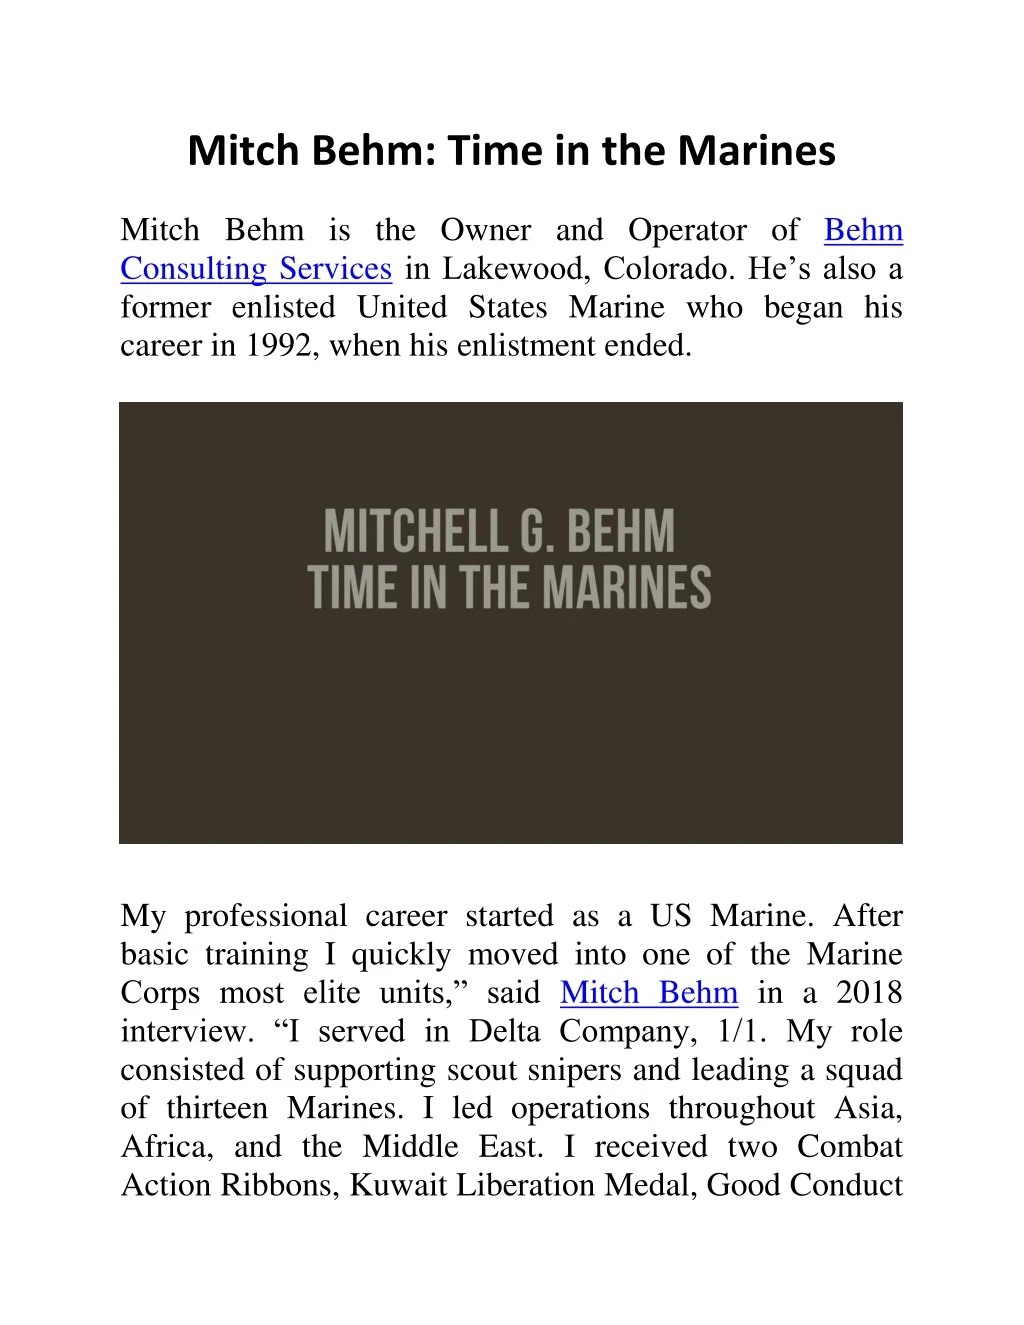 mitch behm time in the marines